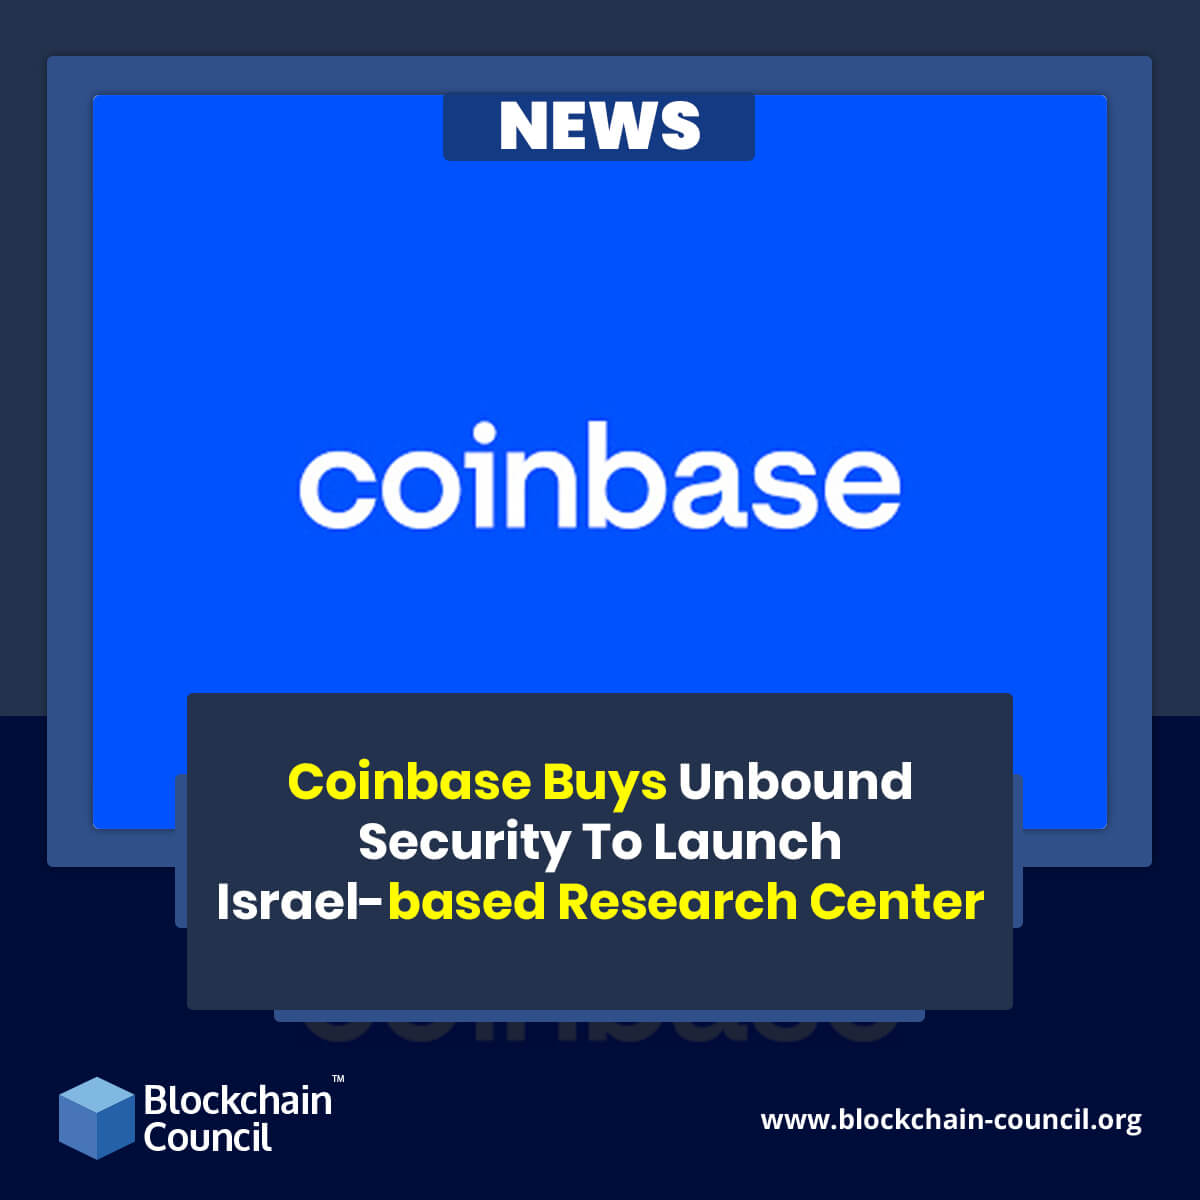 Coinbase Buys Unbound Security To Launch Israel-based Research Center